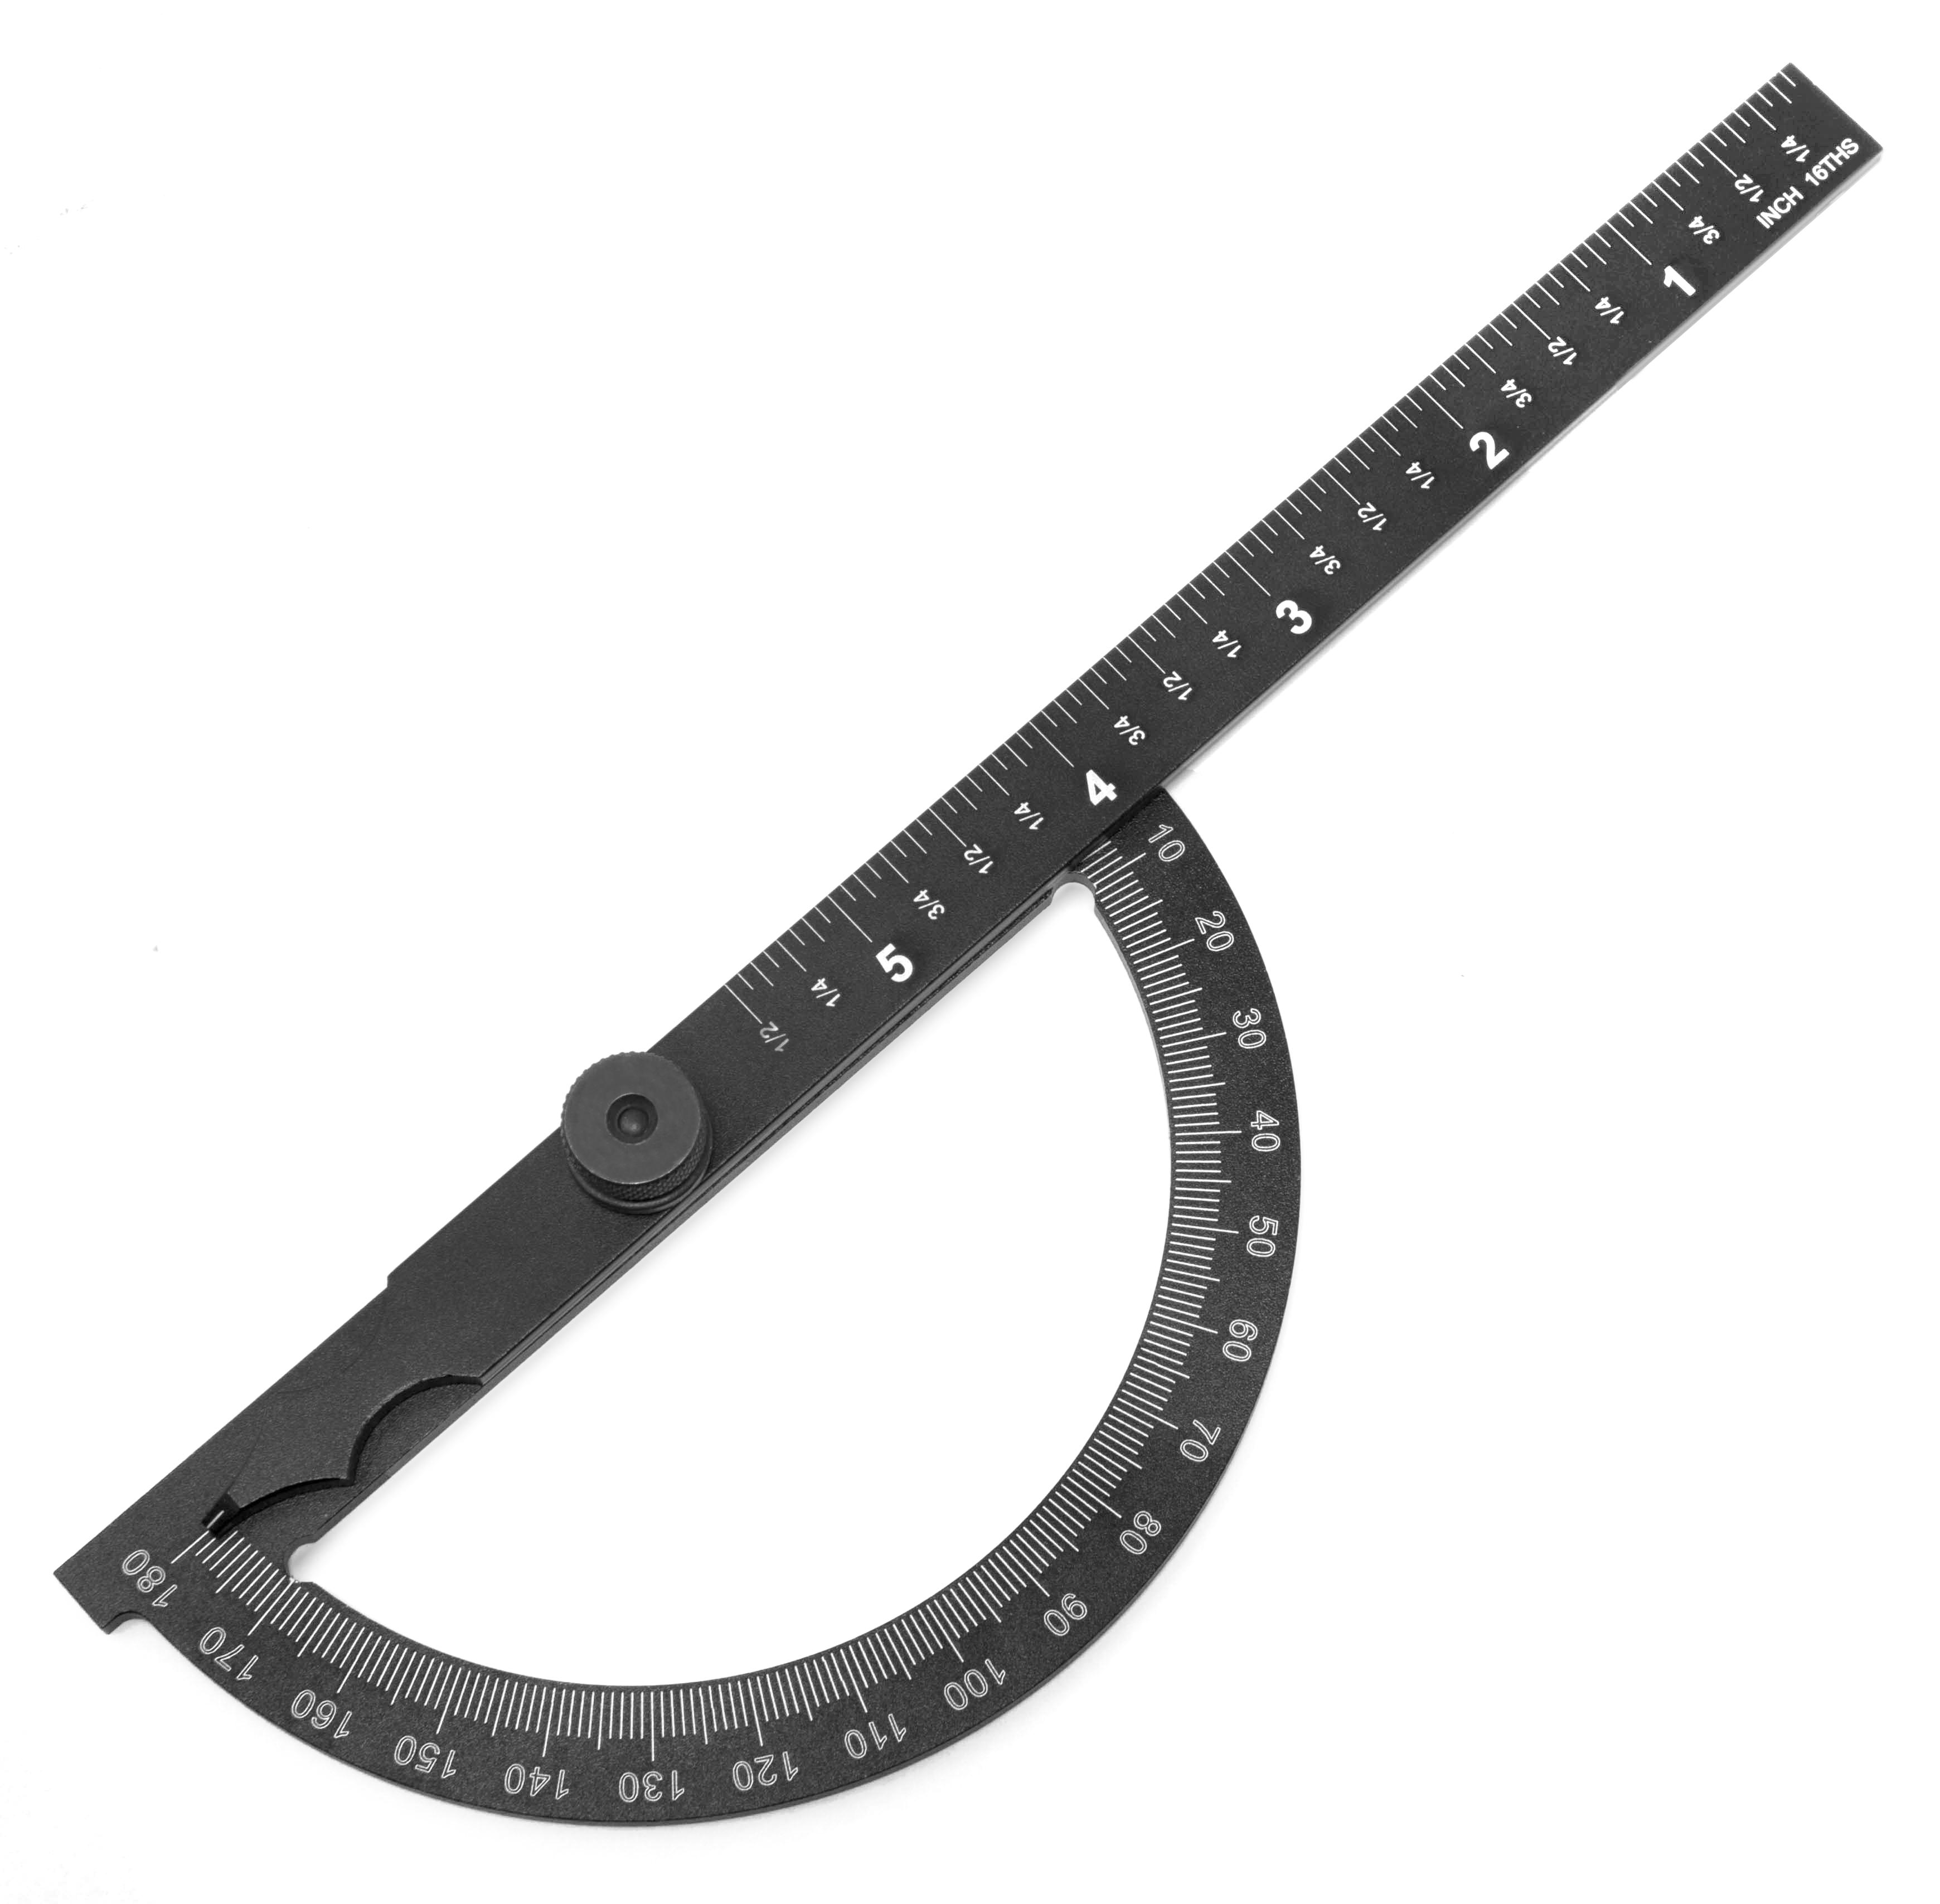 WEN Adjustable Aluminum Protractor and Angle Gauge with Laser Etched Scale - image 2 of 5